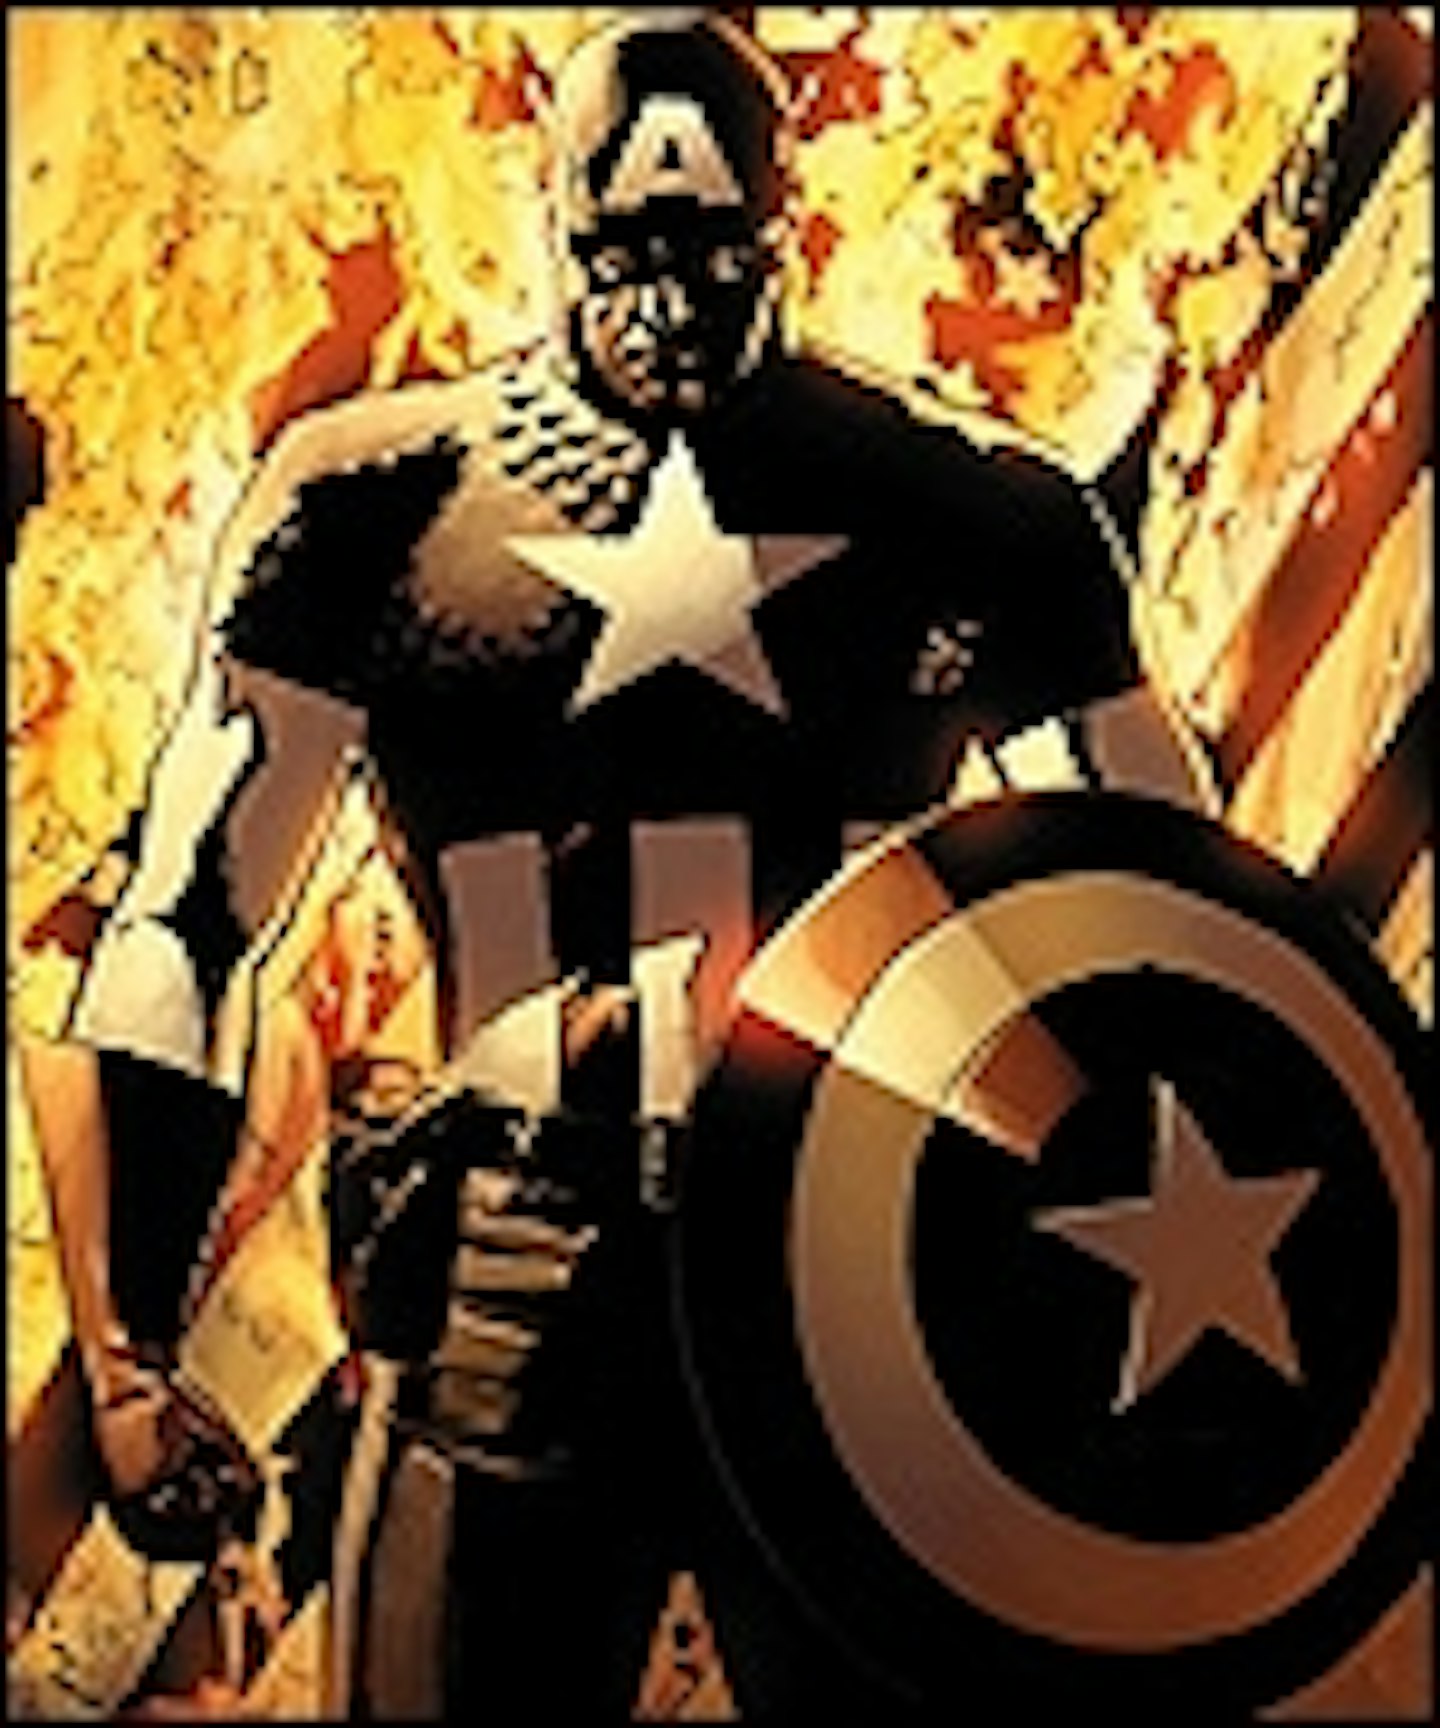 Captain America To Be Cast Soon?